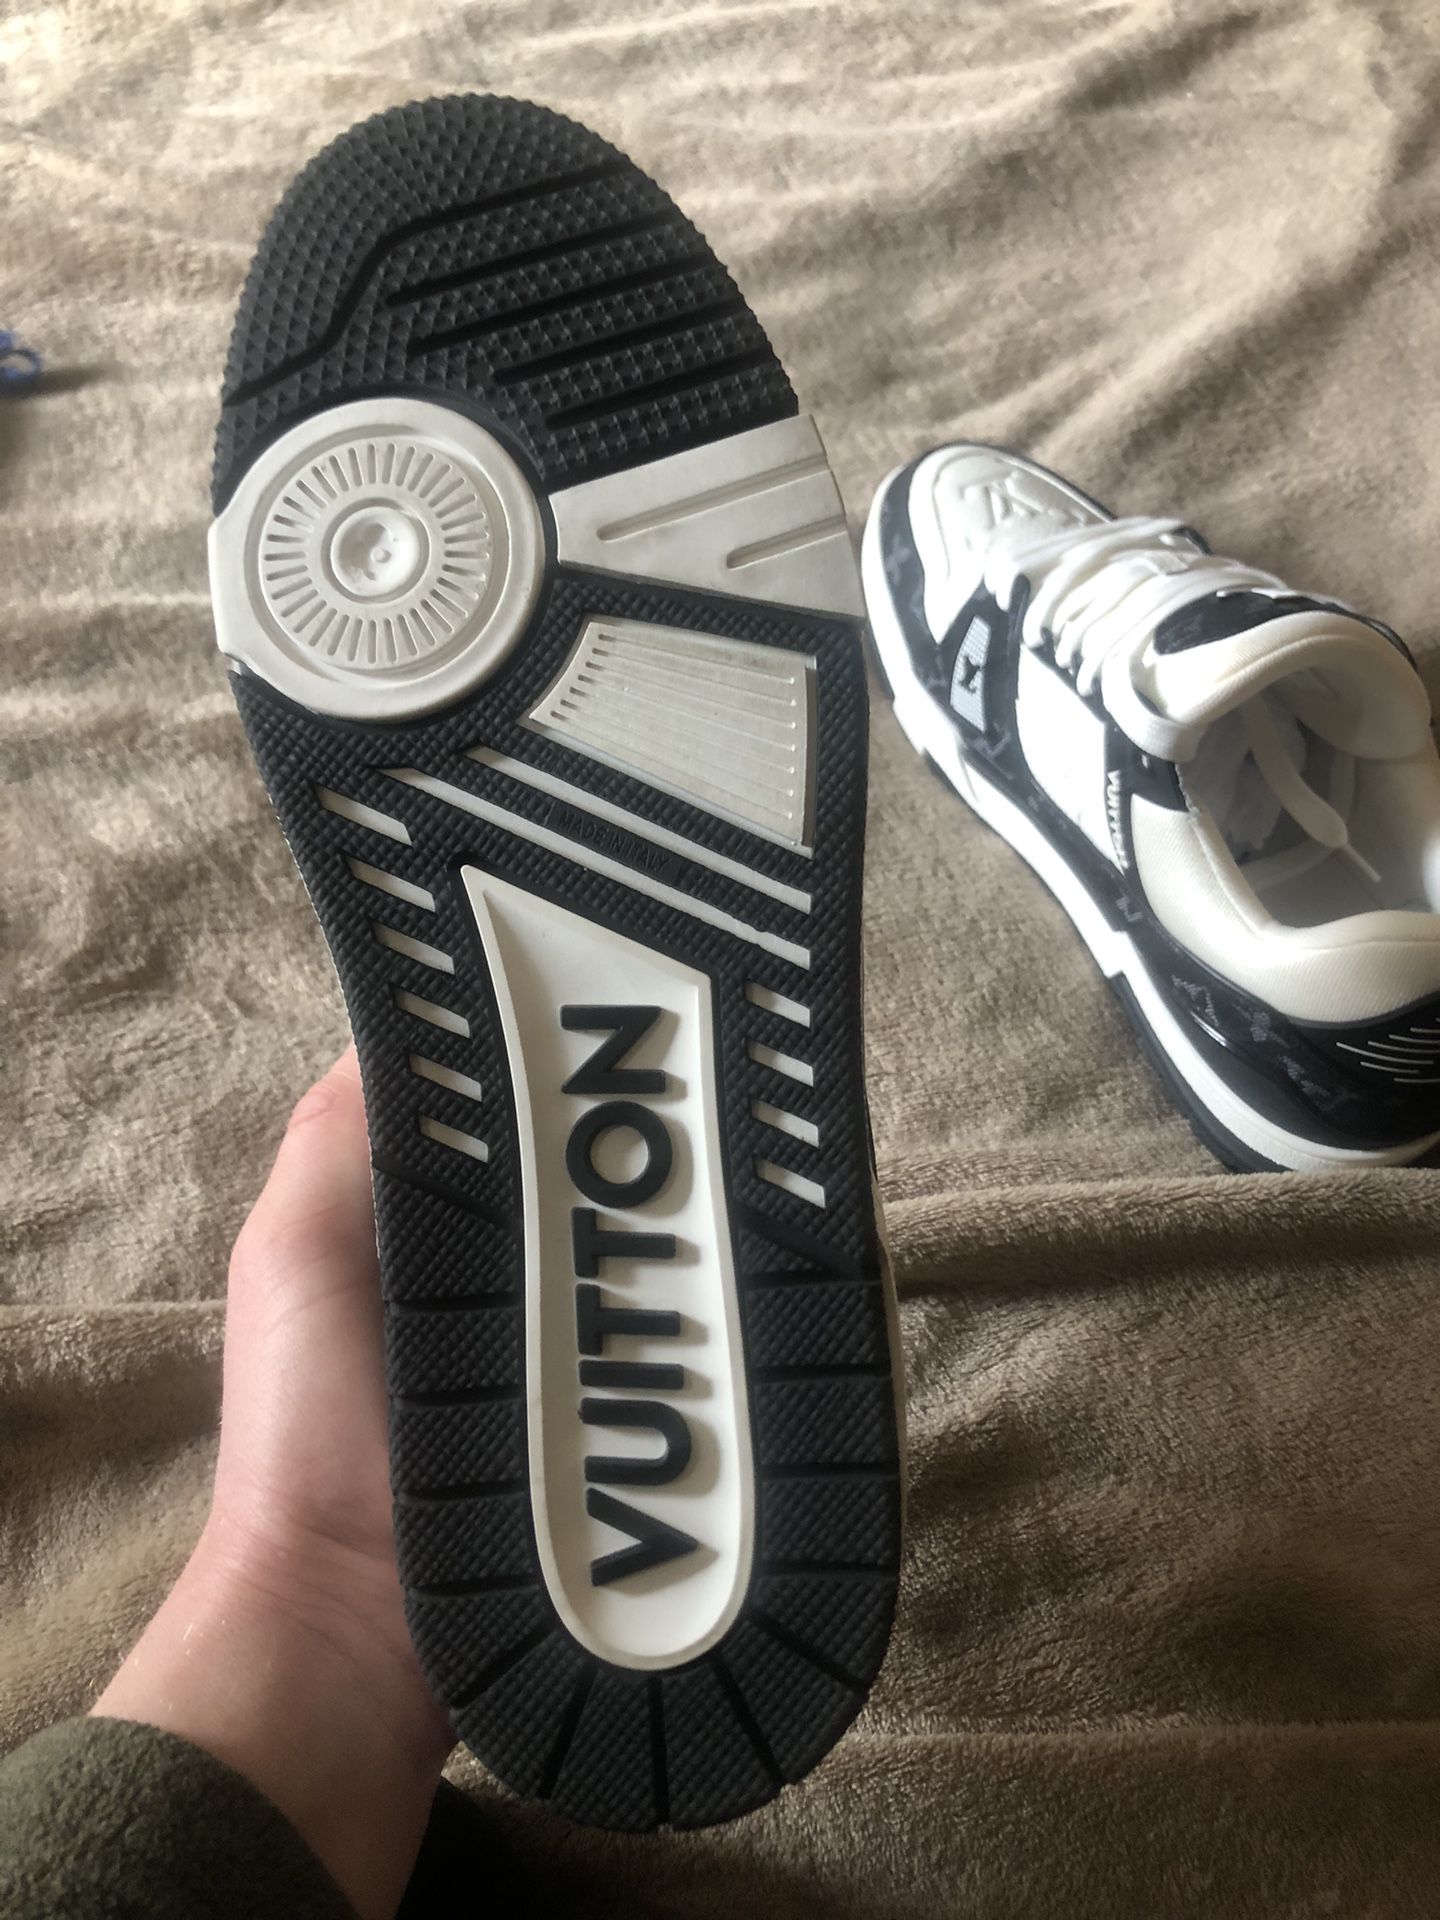 Louis Vuitton LV Trainer Black White Size 10 for Sale in Queens, NY -  OfferUp